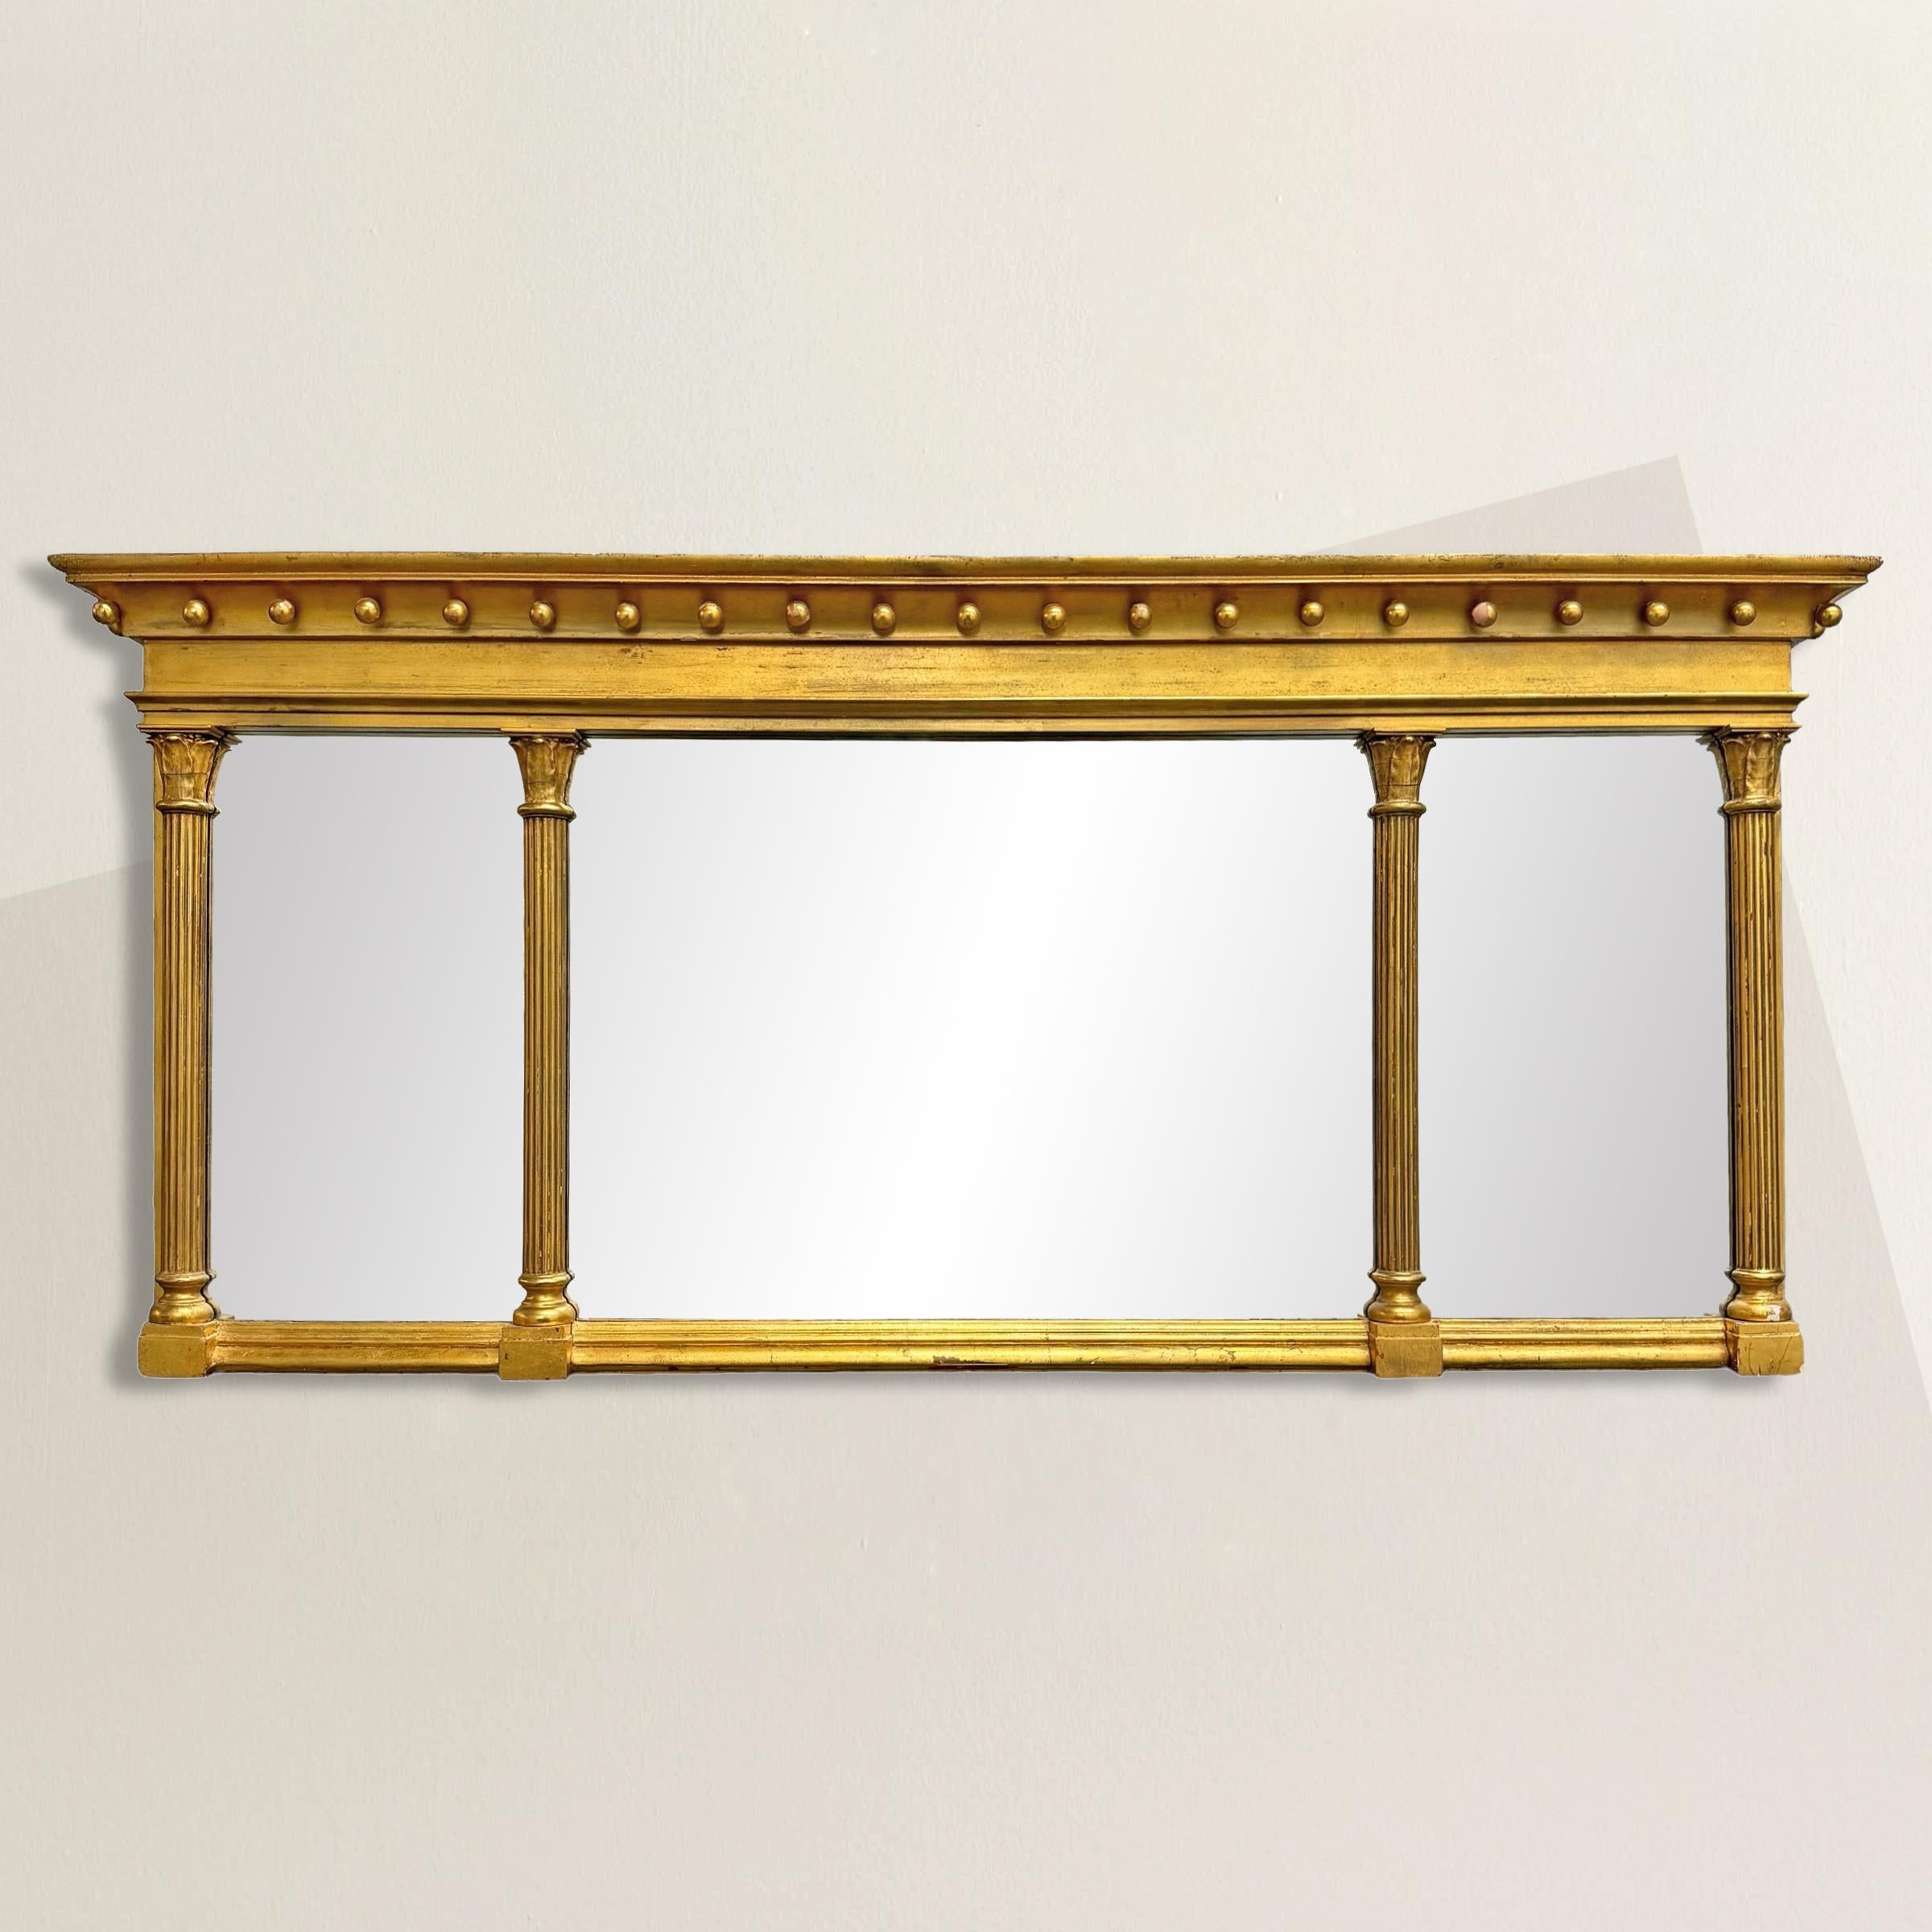 This 19th Century American Federal style gilt wood mirror is a quintessential example of the elegance and symmetry that define the Federal design aesthetic. Its frame, adorned with stylized Corinthian columns, supports an entablature crowned with a